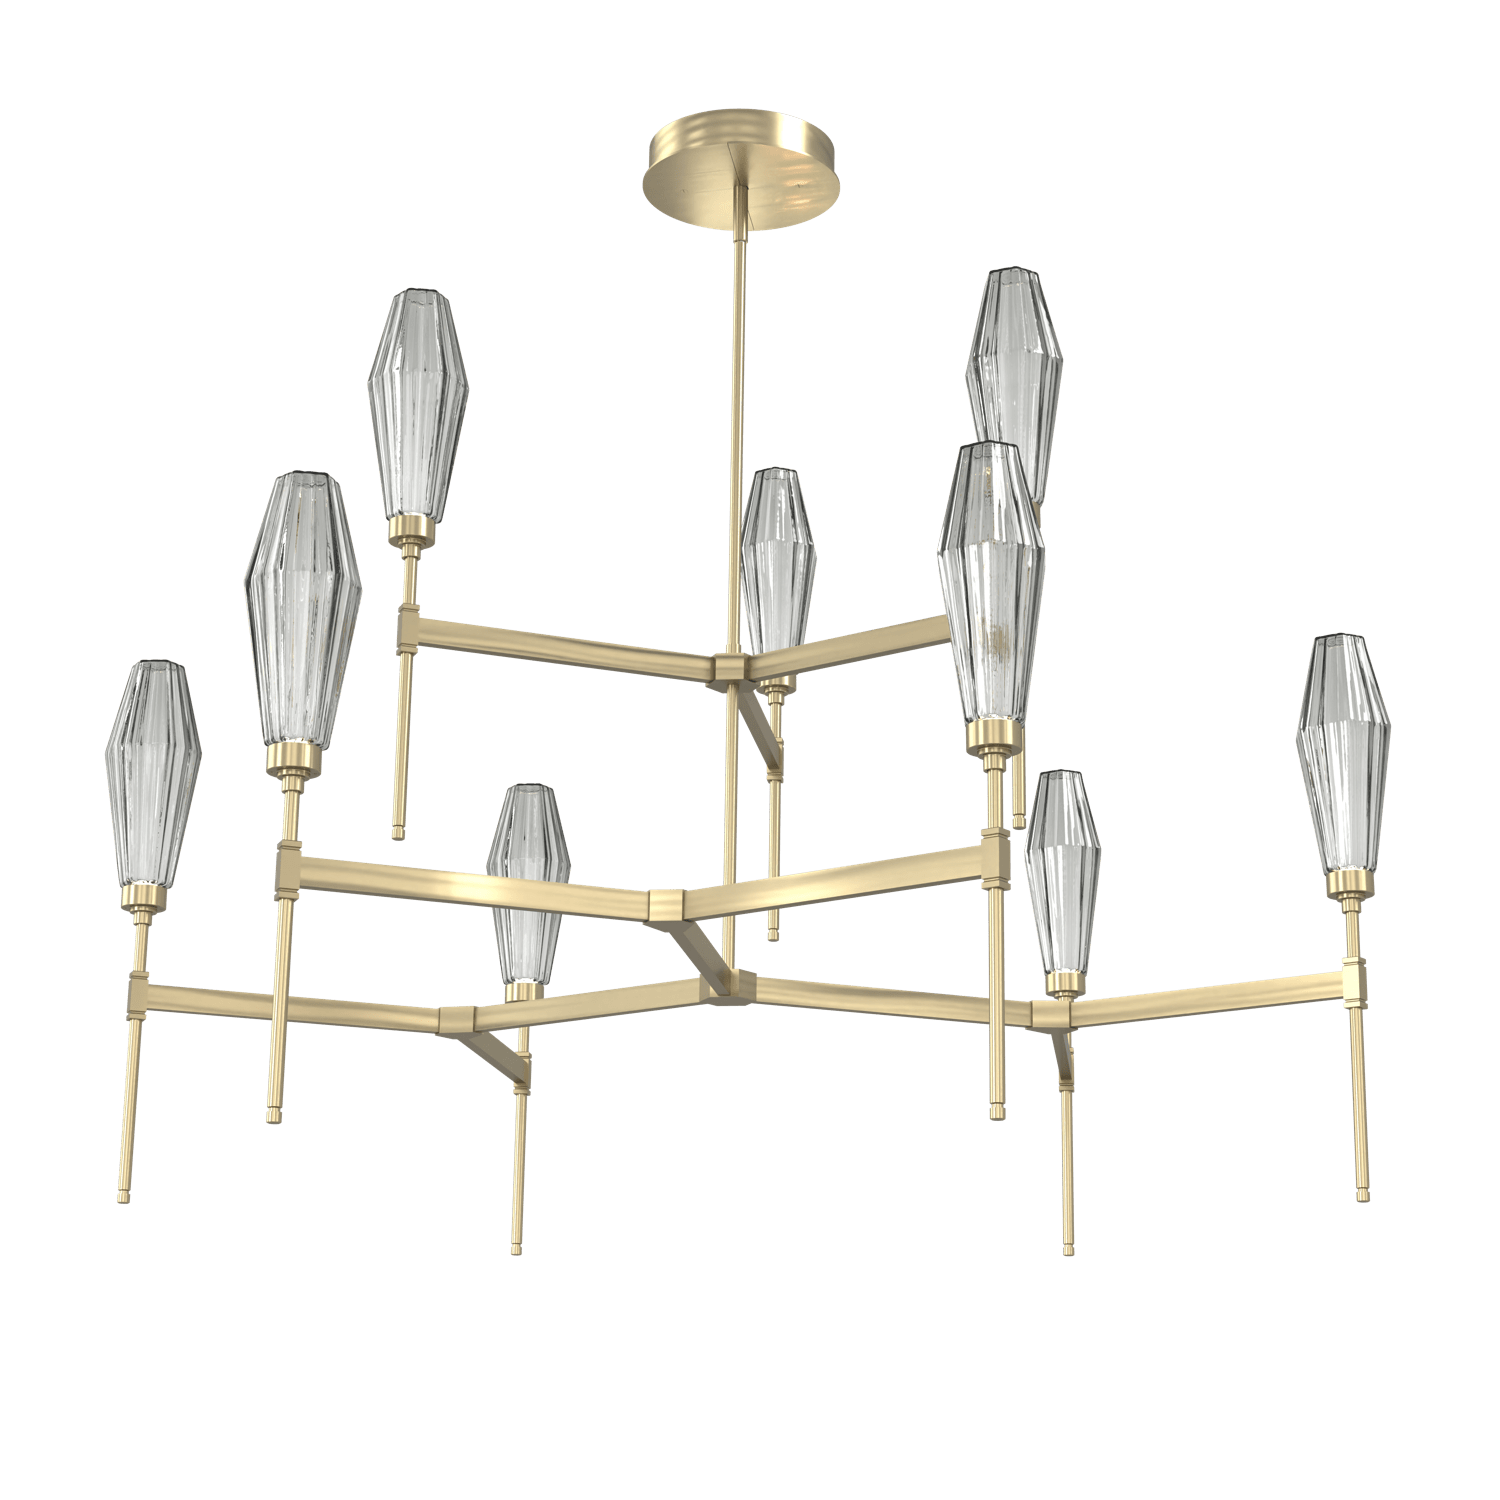 CHB0049-54-HB-RS-Hammerton-Studio-Aalto-54-inch-round-two-tier-belvedere-chandelier-with-heritage-brass-finish-and-optic-ribbed-smoke-glass-shades-and-LED-lamping